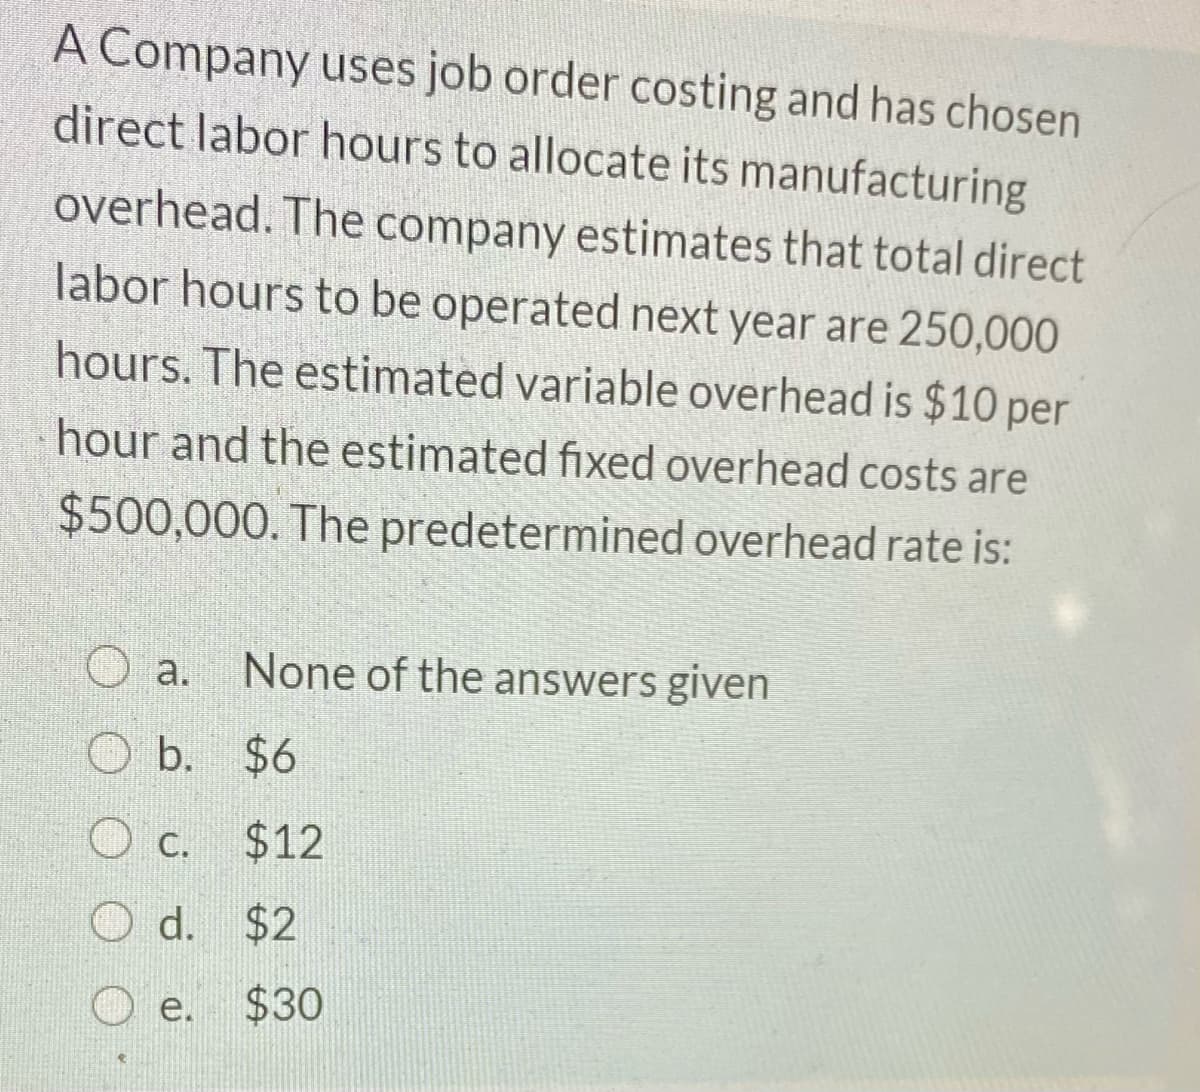 A Company uses job order costing and has chosen
direct labor hours to allocate its manufacturing
overhead. The company estimates that total direct
labor hours to be operated next year are 250,000
hours. The estimated variable overhead is $10 per
hour and the estimated fixed overhead costs are
$500,000. The predetermined overhead rate is:
None of the answers given
O a.
O b. $6
O c.
$12
С.
d. $2
e.
$30
